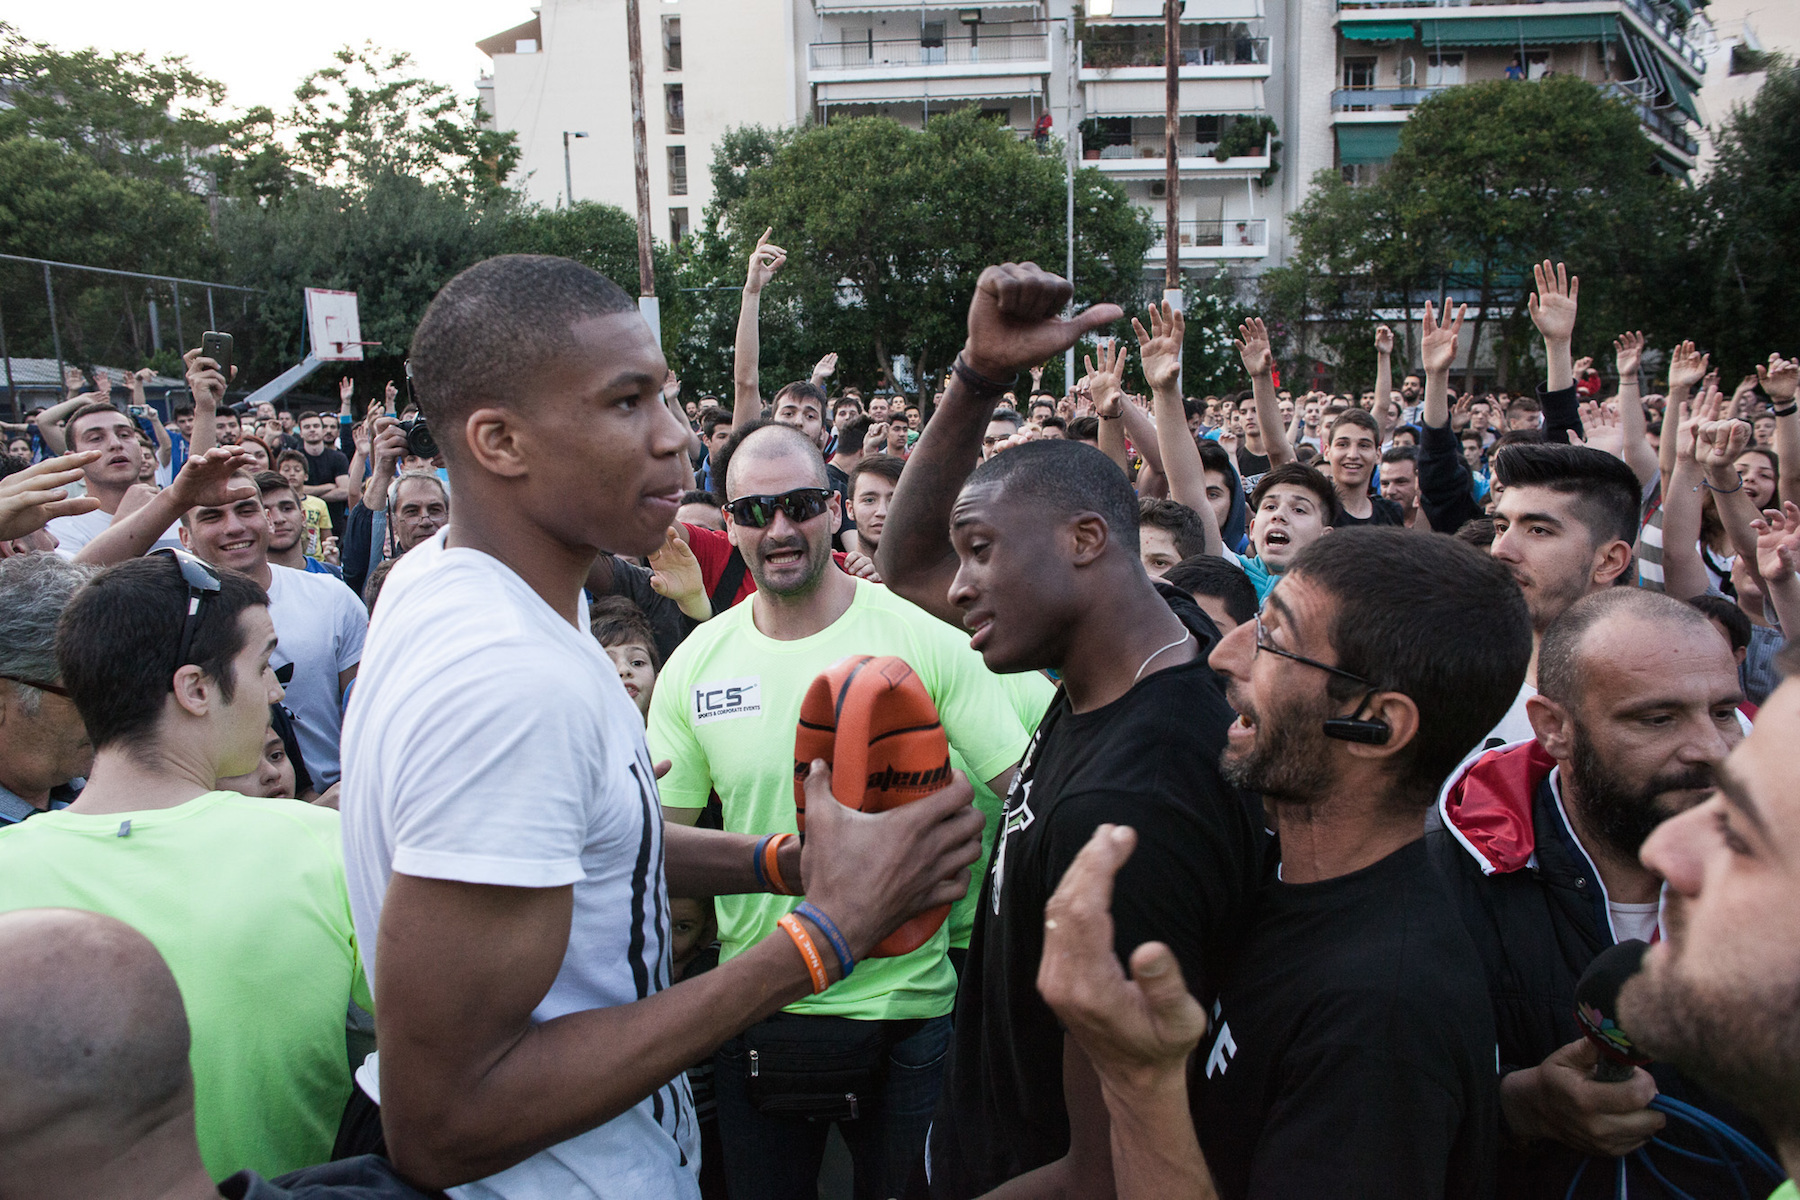 Athens Went Nuts for Its Returning NBA Star Giannis Antetokounmpo Last Week - VICE1800 x 1200